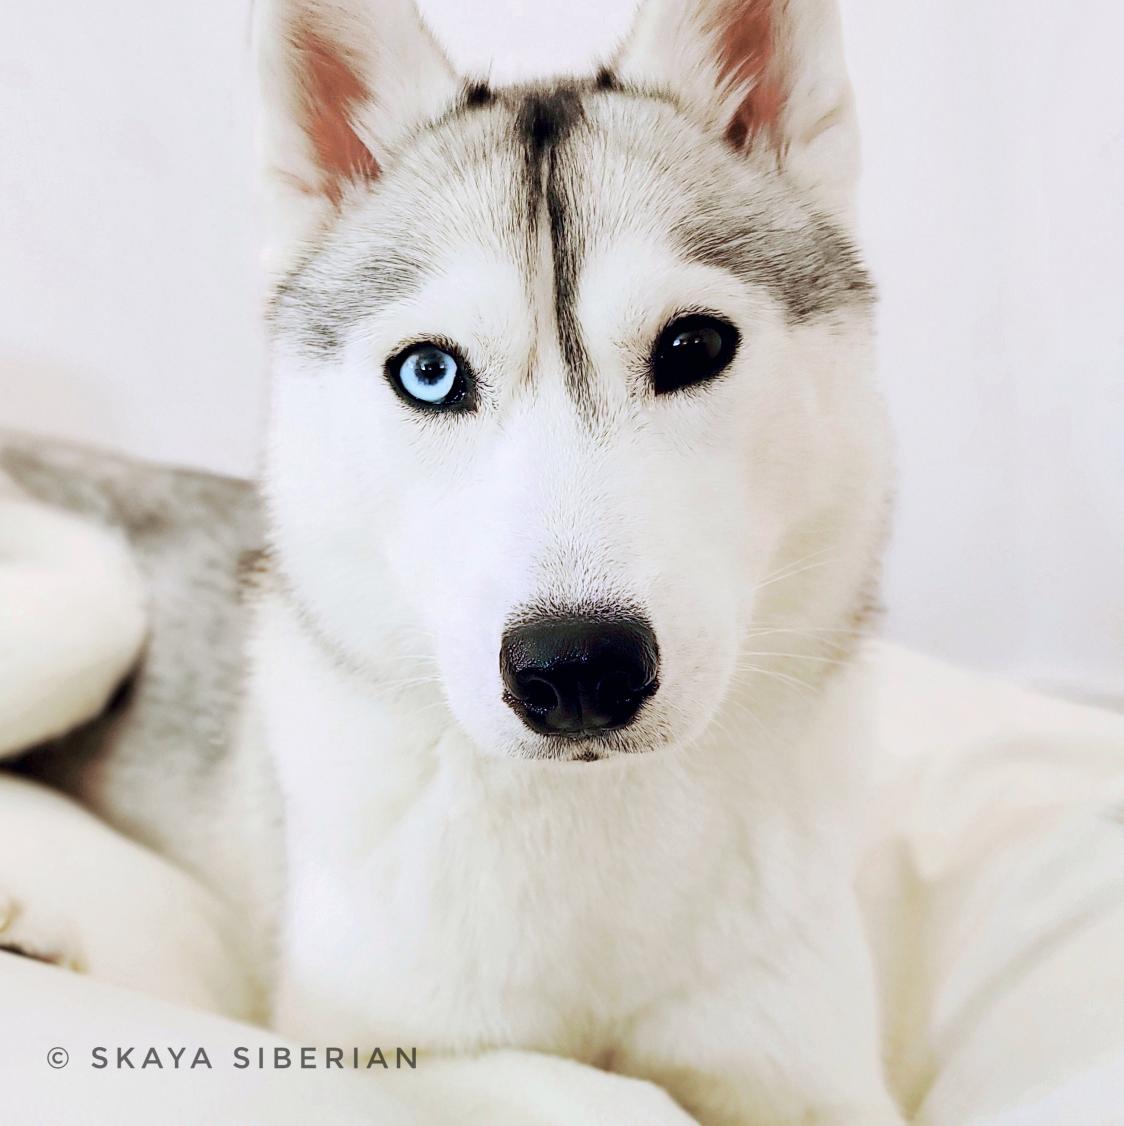 Someone on our walk today stopped by and said how beautiful I was... but that it was 'unfortunate about those eyes'. Tell me: what do you see when you look in my eyes? ❄✨
#dogs #DogsofTwittter #doge #bornthisway #husky #CuteAnimals #cute